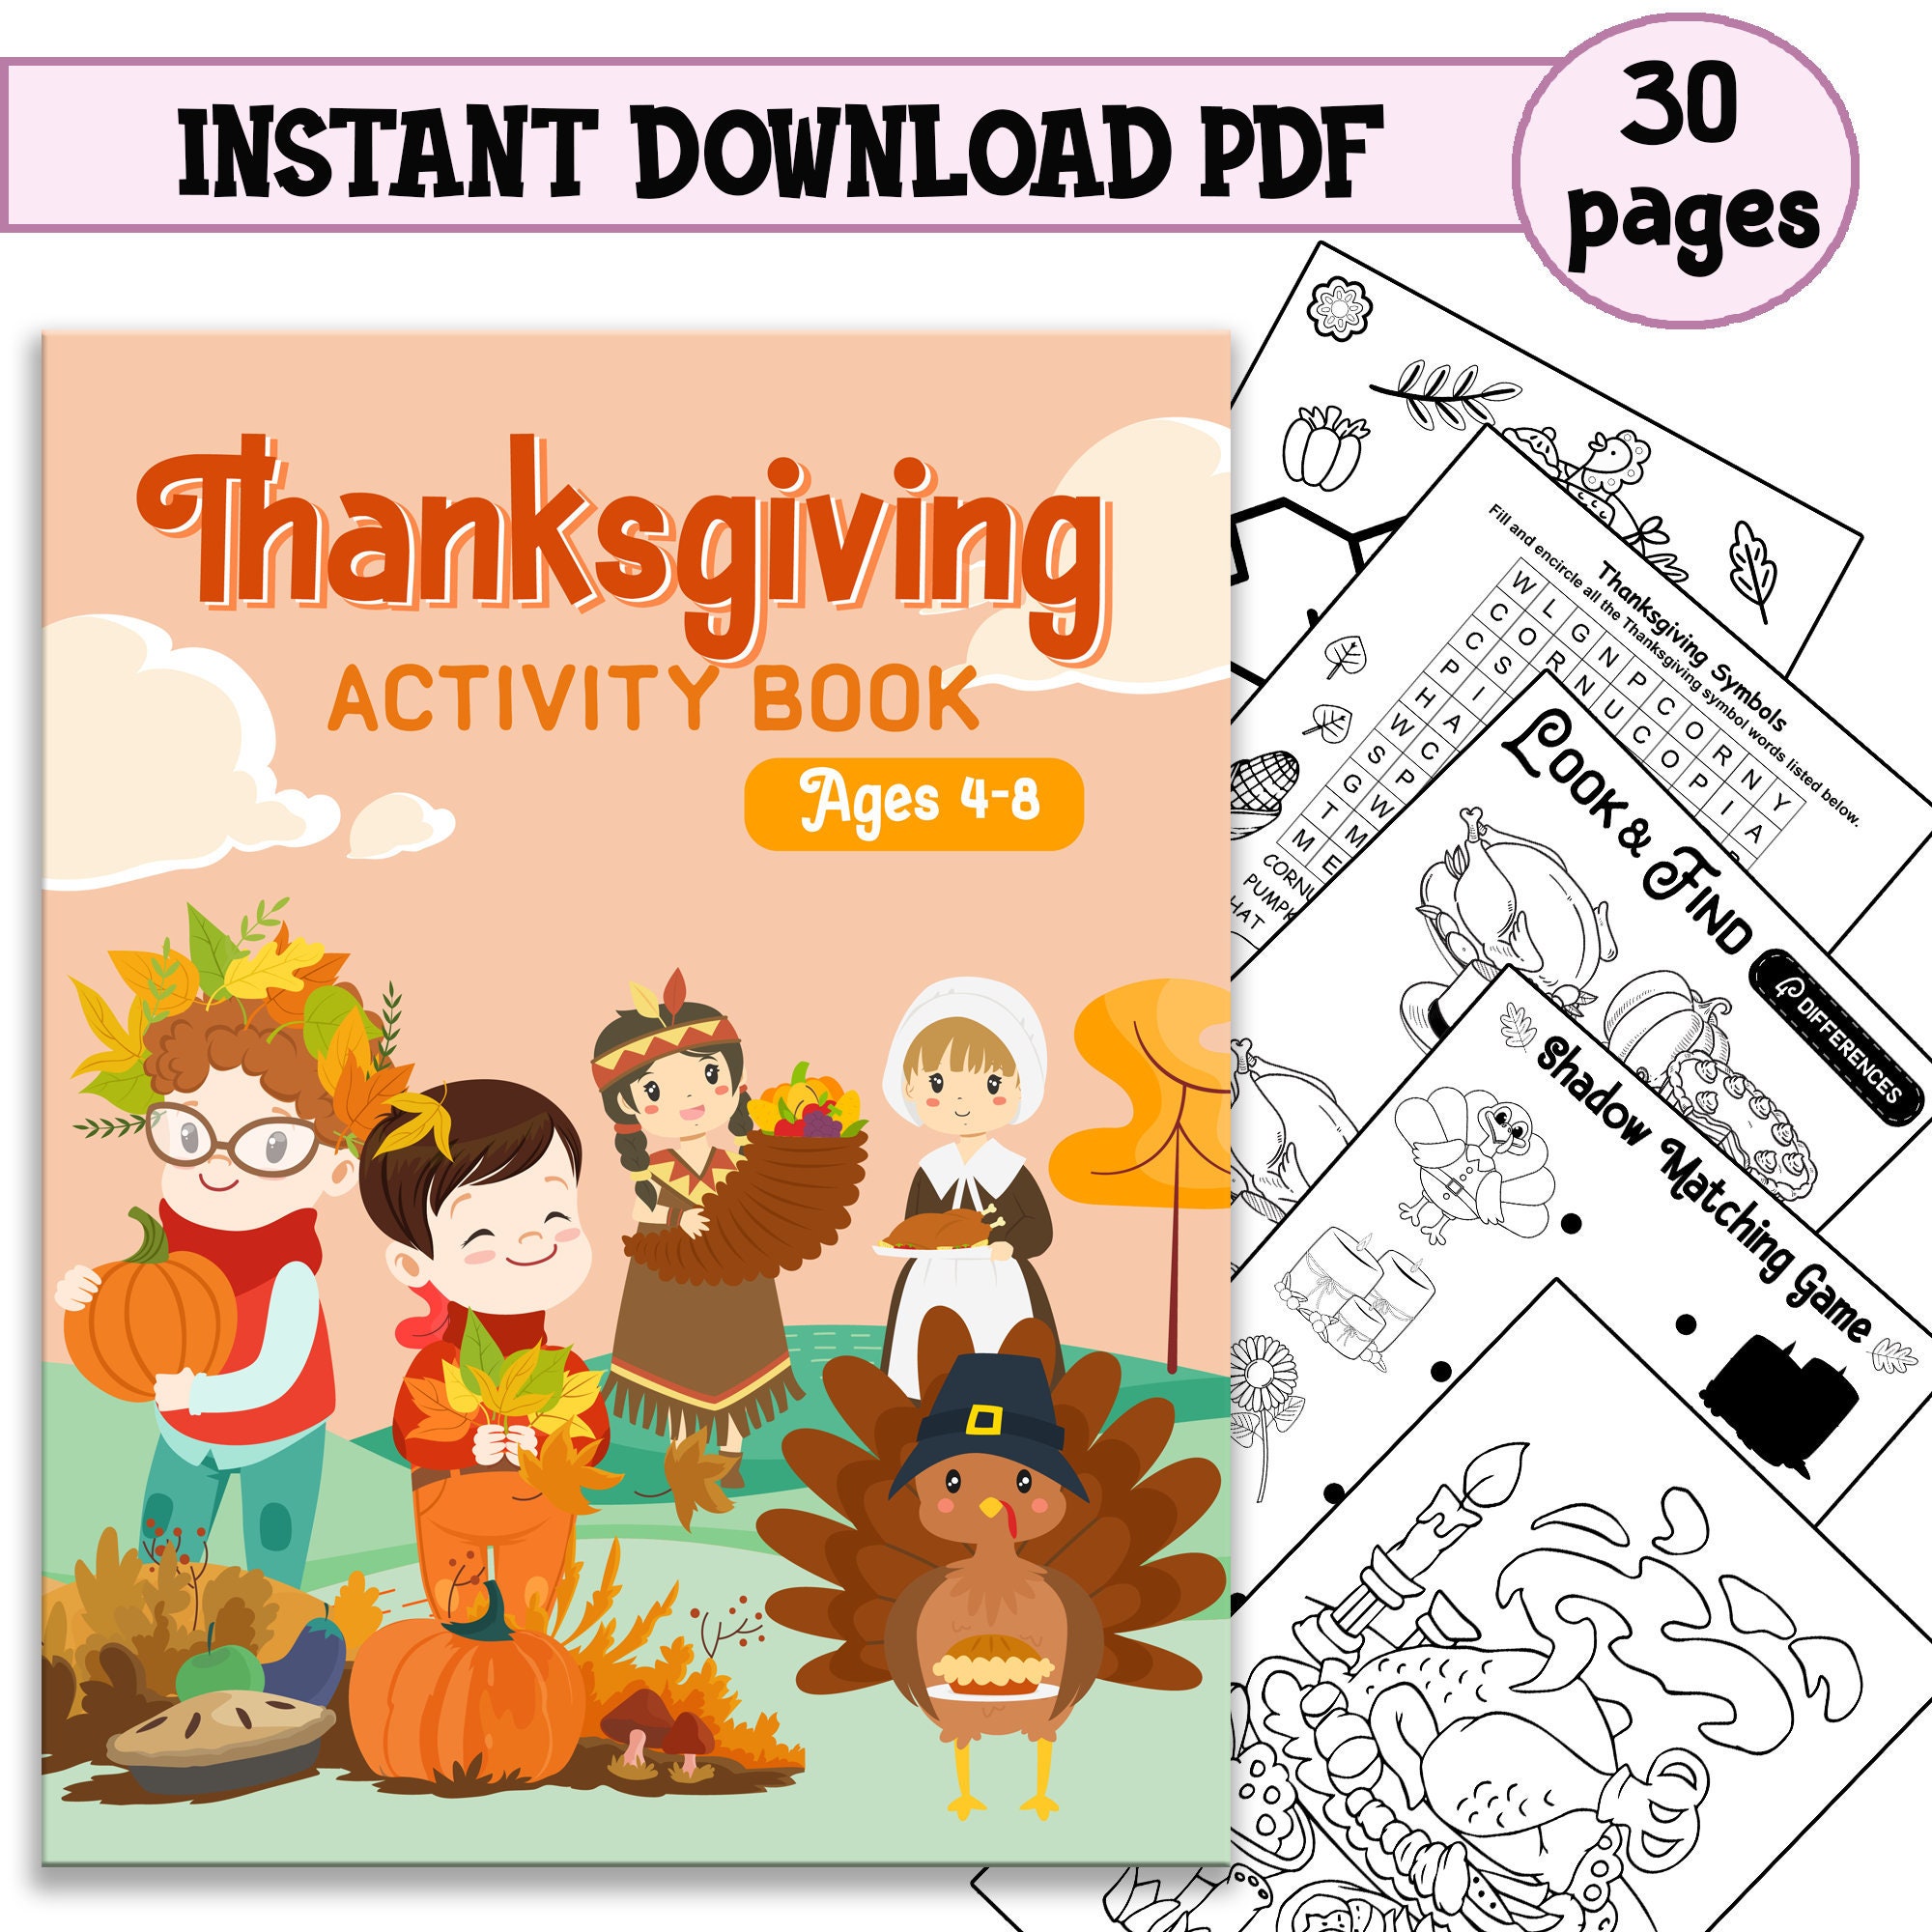 Autumn Coloring Book for Kids Ages 4-8: A Collection of Fun and Cute Autumn Coloring Pages for Kids Ages 4-8 - Autumn Drawing Book for Kids - Autumn Gift for Children [Book]